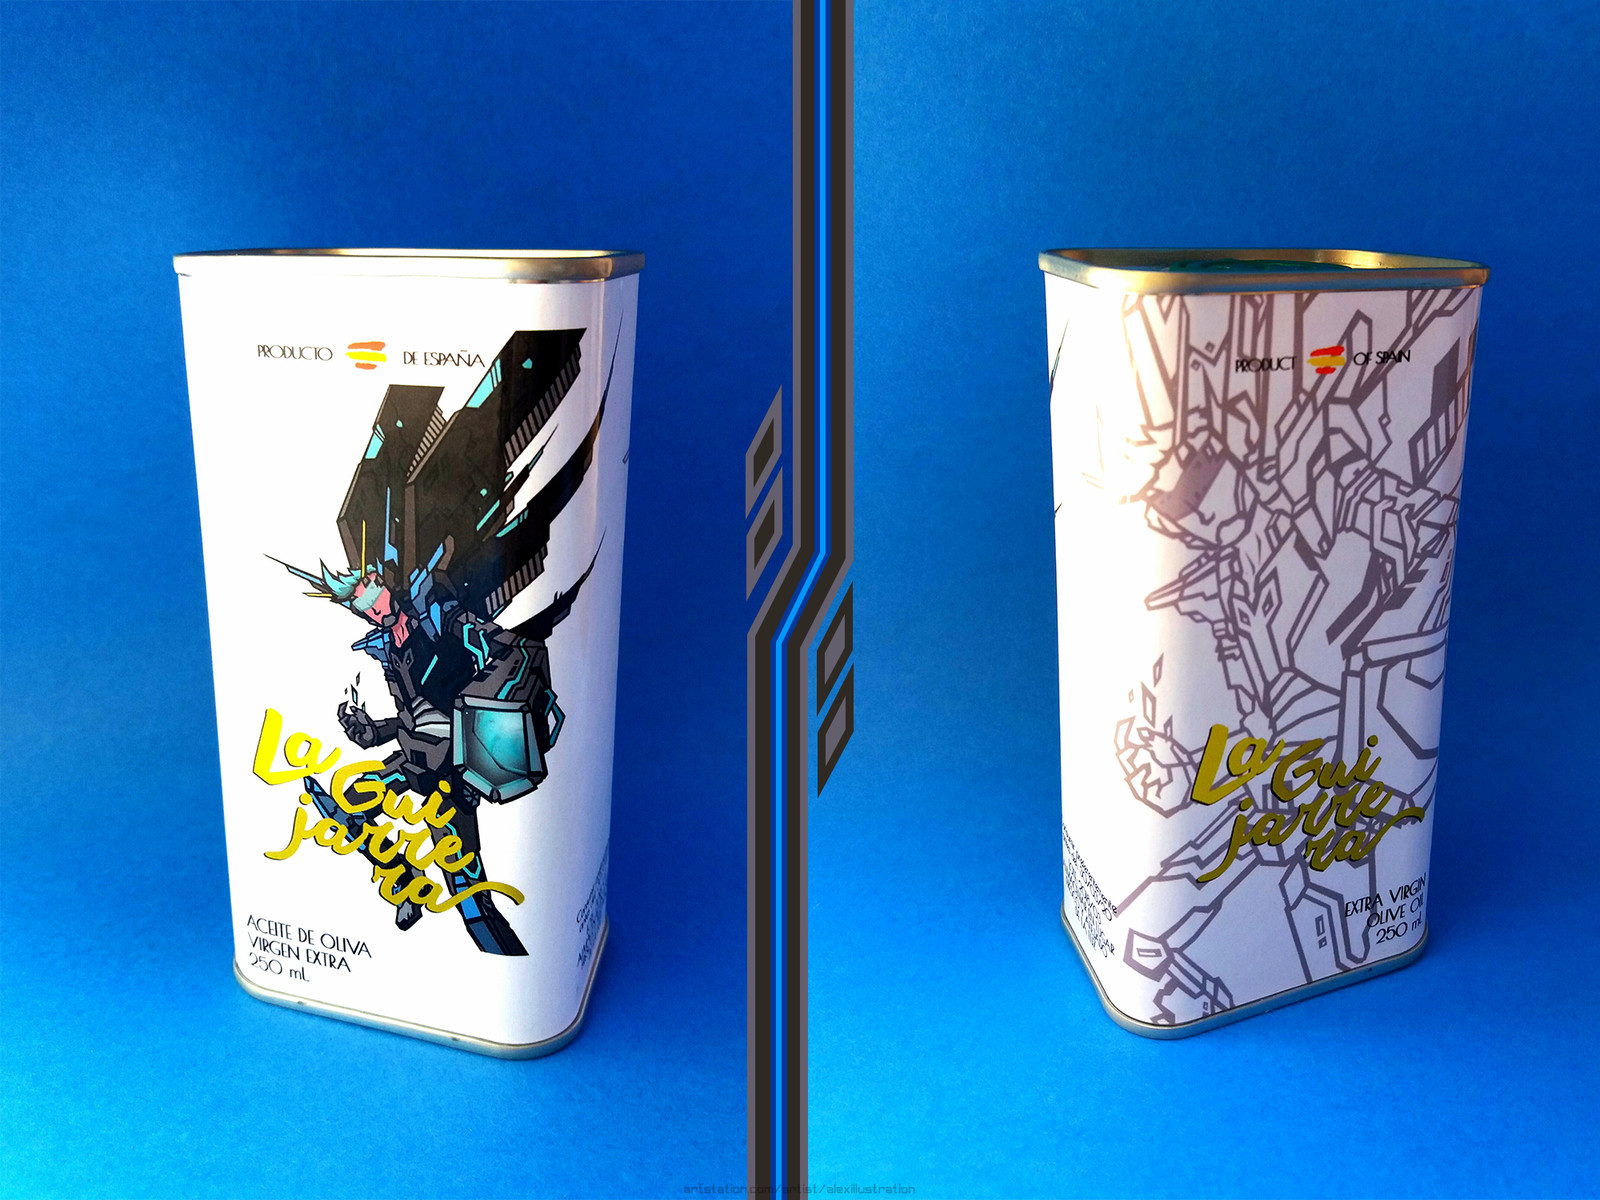 Illustration on the actual can label